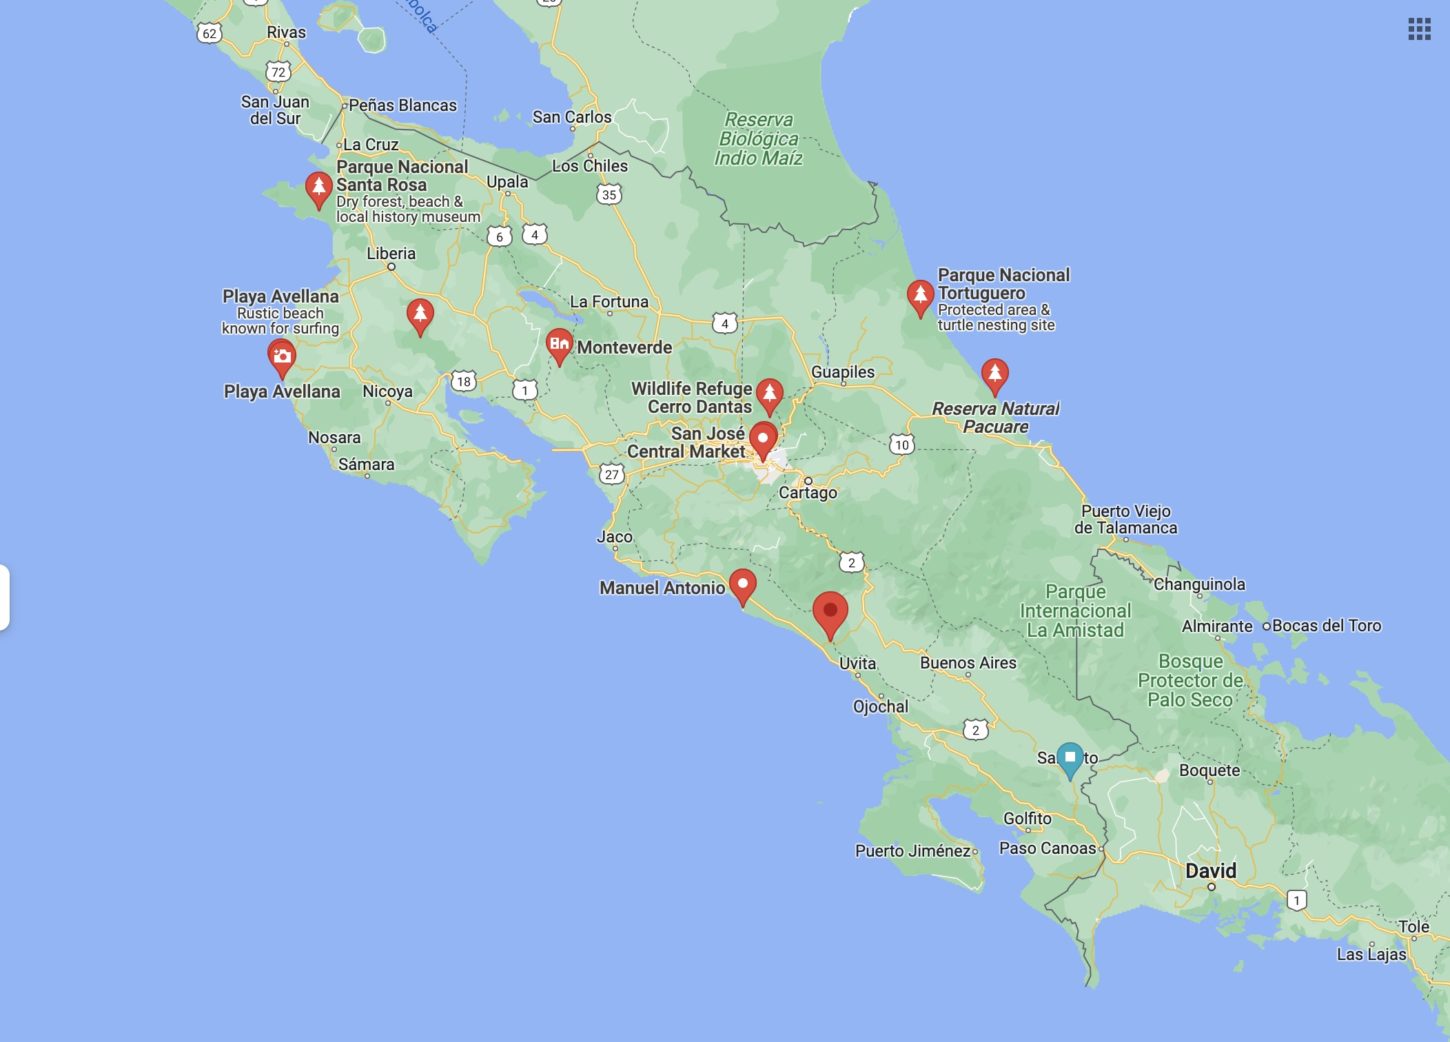 a map of costa rica showing some of the major regions for nature journaling